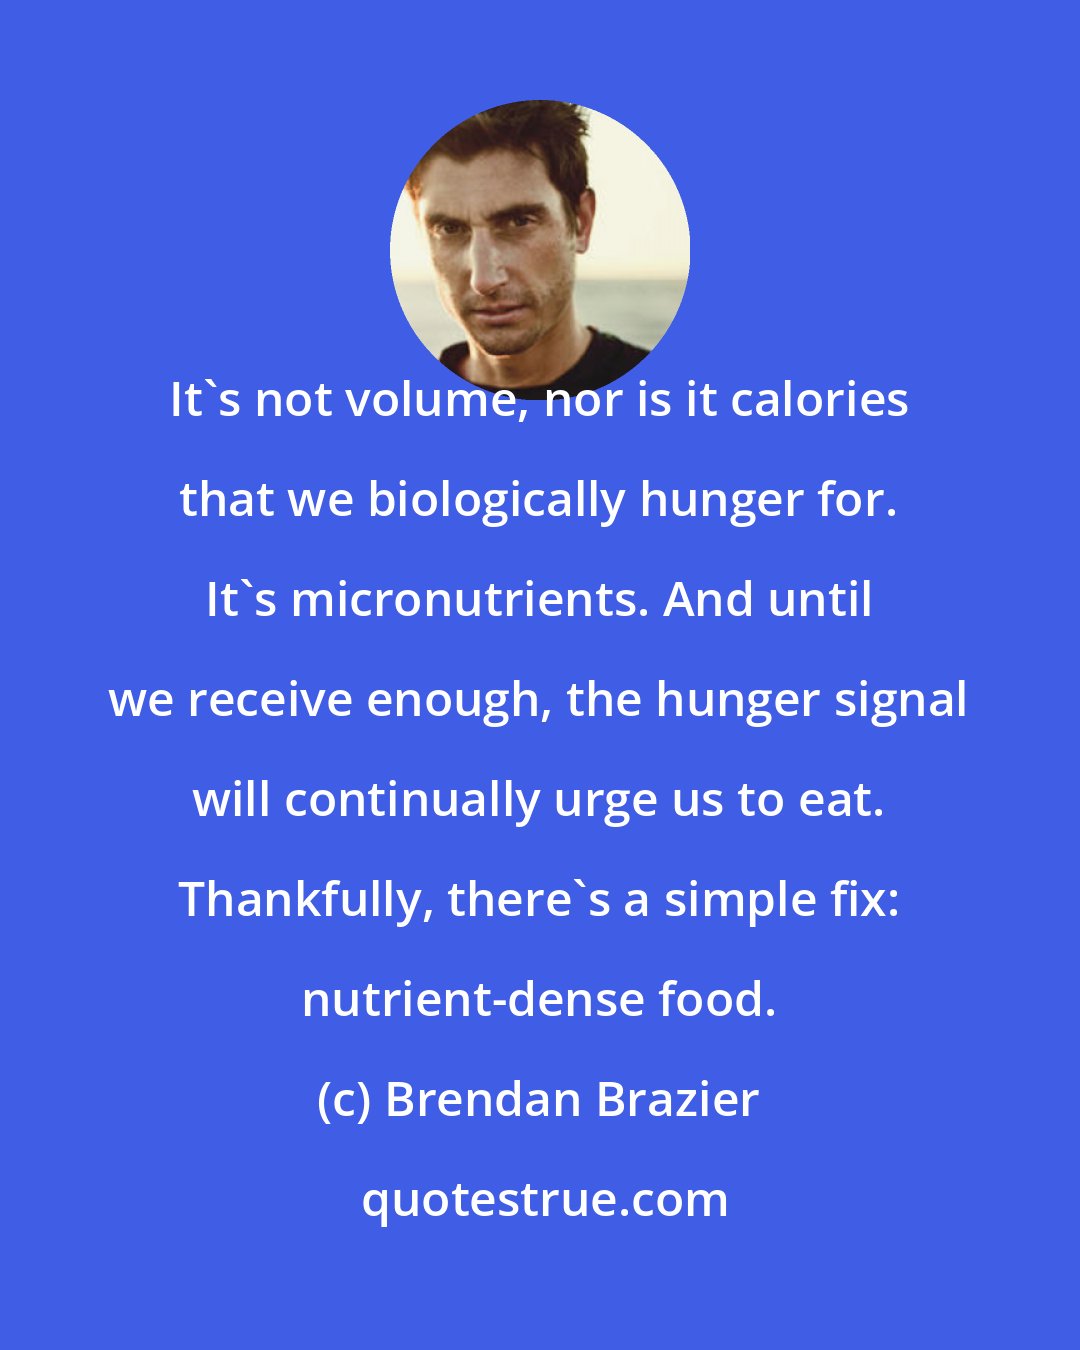 Brendan Brazier: It's not volume, nor is it calories that we biologically hunger for. It's micronutrients. And until we receive enough, the hunger signal will continually urge us to eat. Thankfully, there's a simple fix: nutrient-dense food.